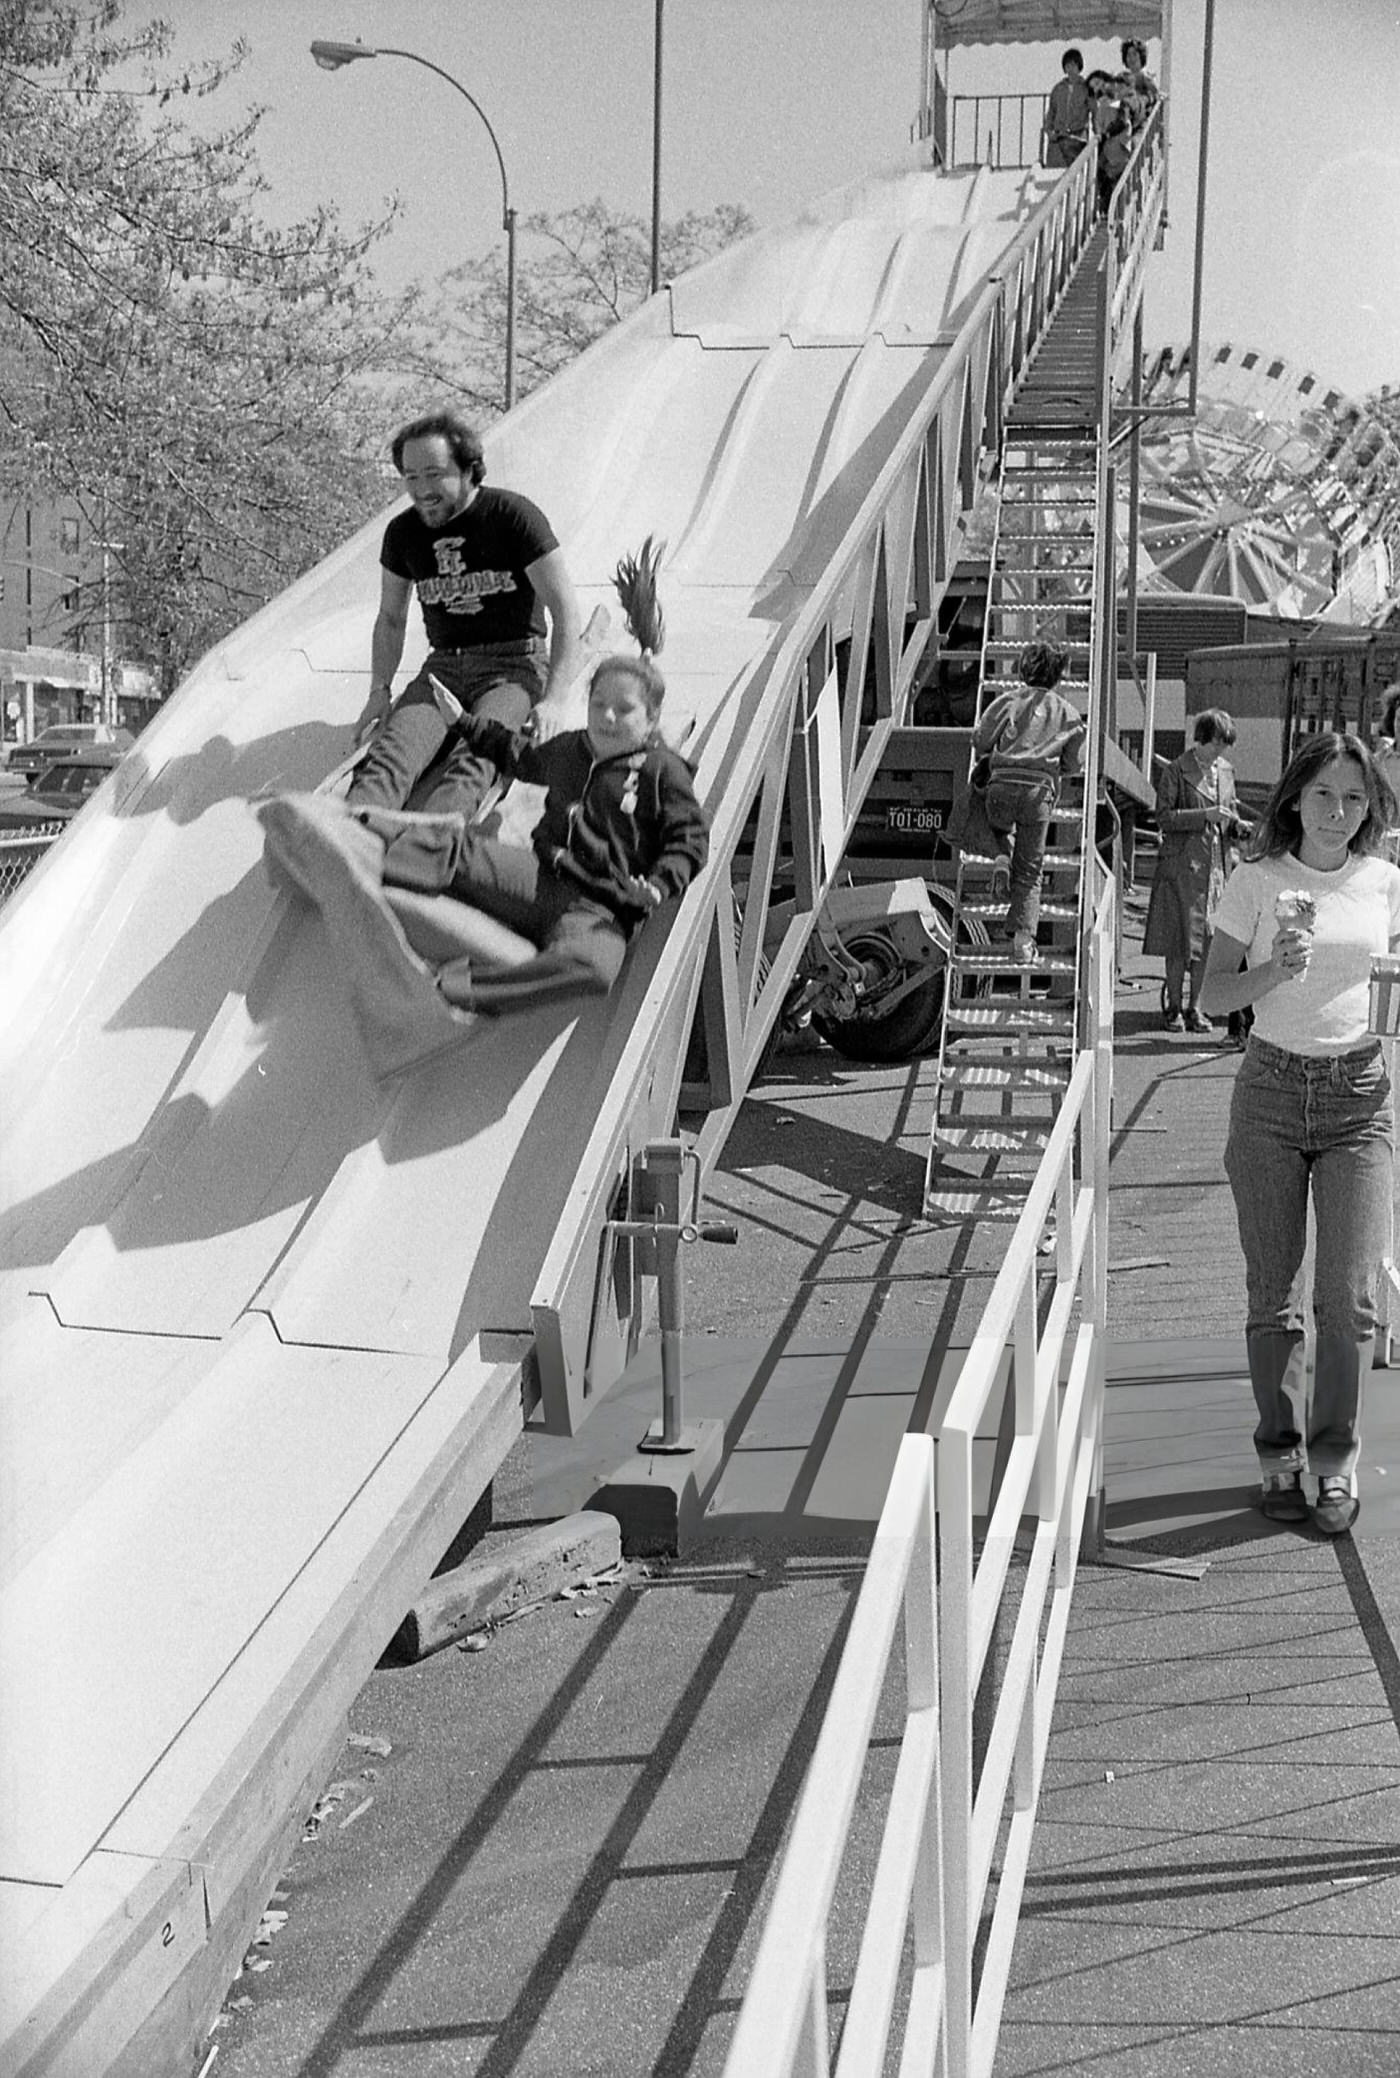 Two People Going Down A Slide At The Resurrection Ascension Church Carnival In Rego Park, Queens, 1979.